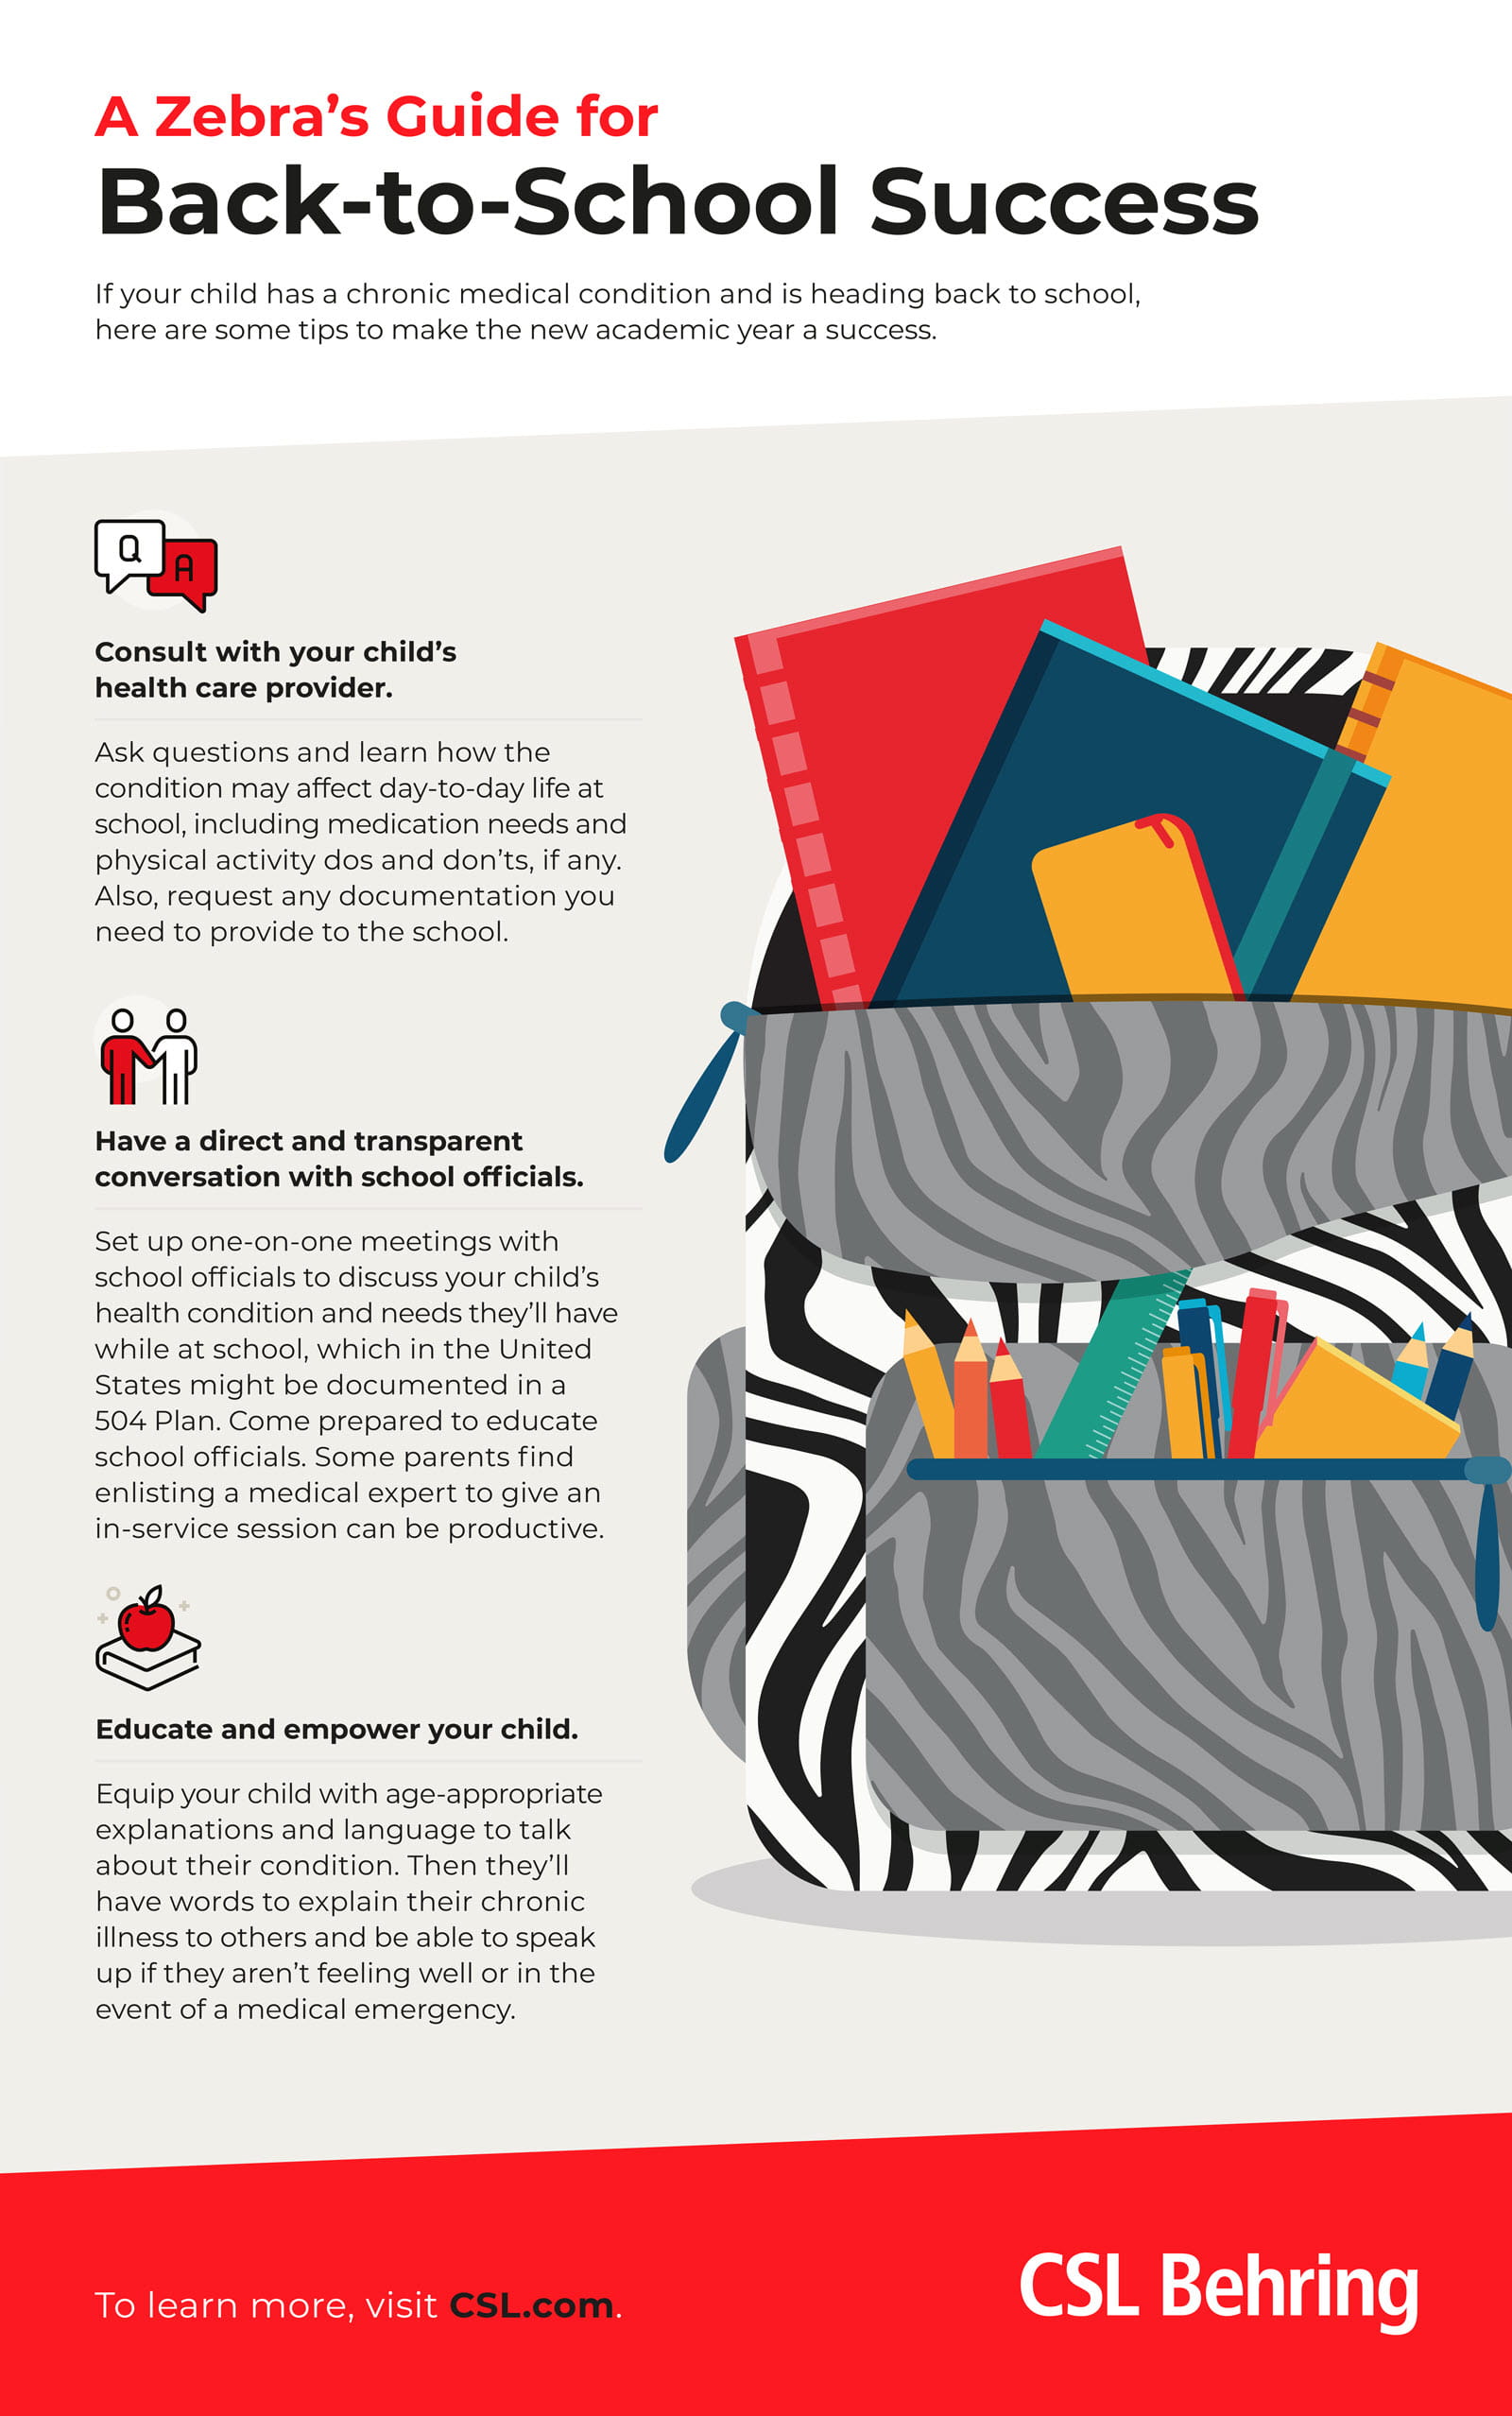 A Zebra Parent's Guide to Back to School Success, including recommendations to contact school officials and educate the school staff.